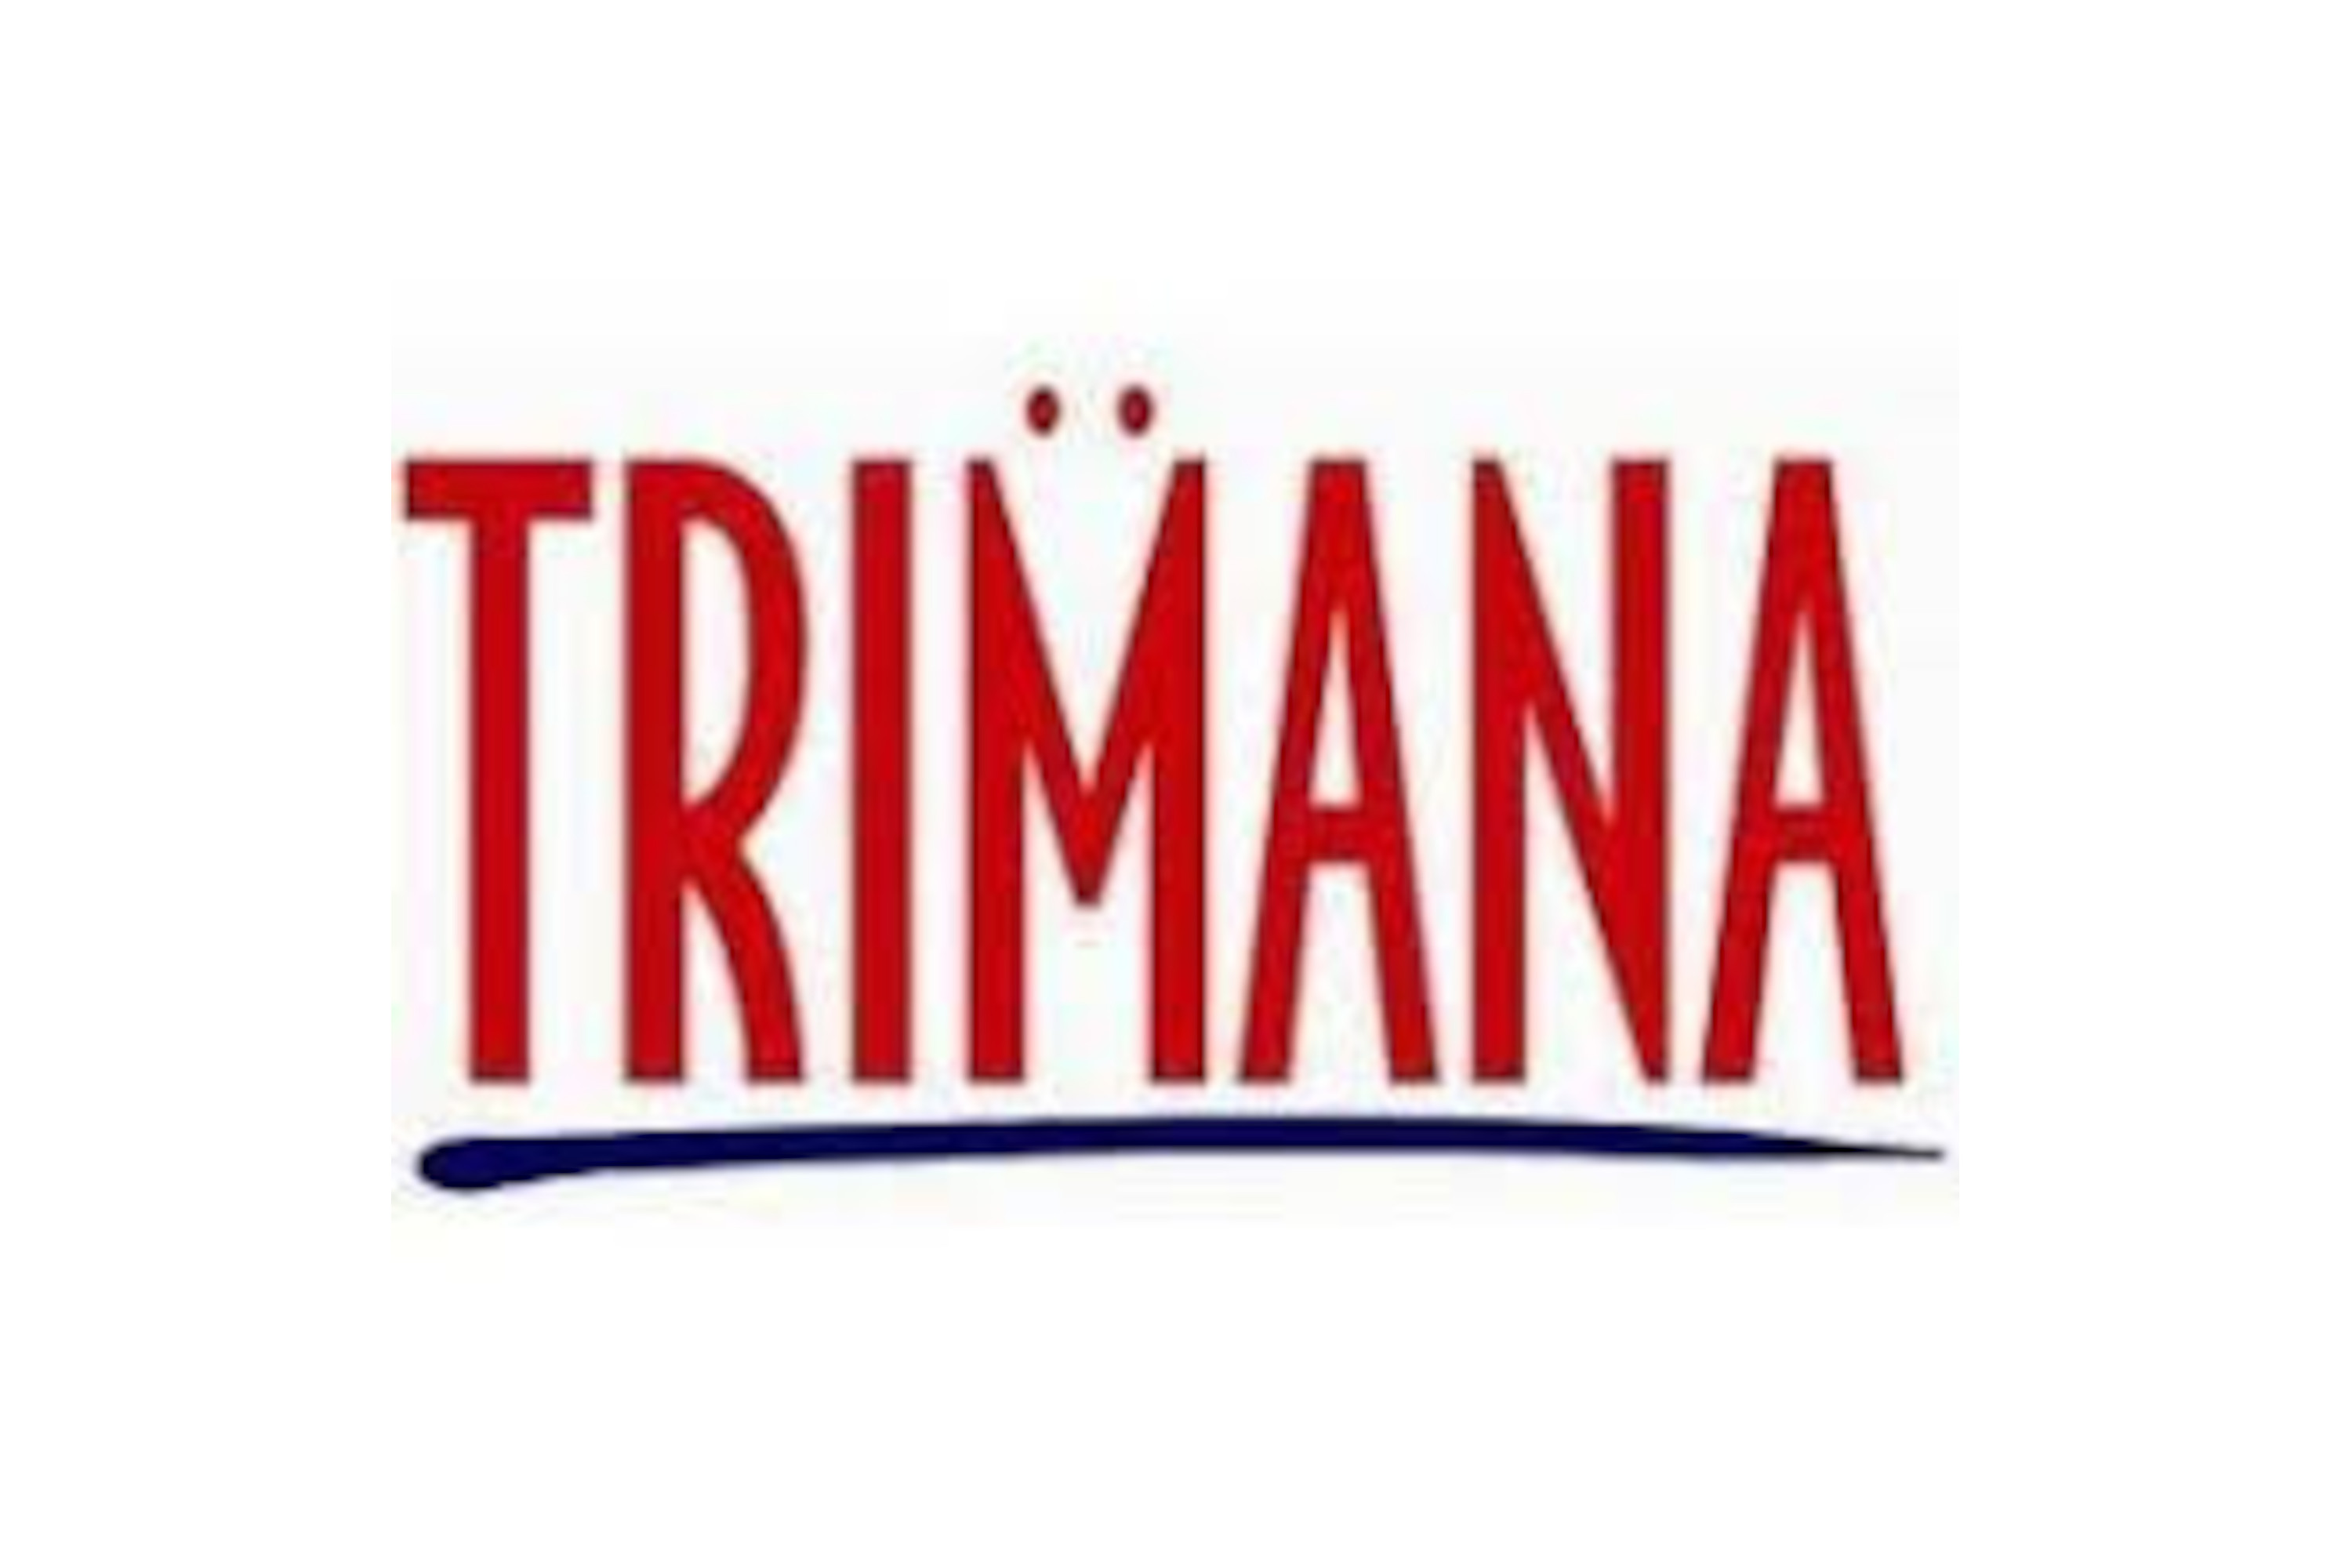 Trimana logo reads "TRIMANA" in red text with two dots above the M and underlined underlined in blue